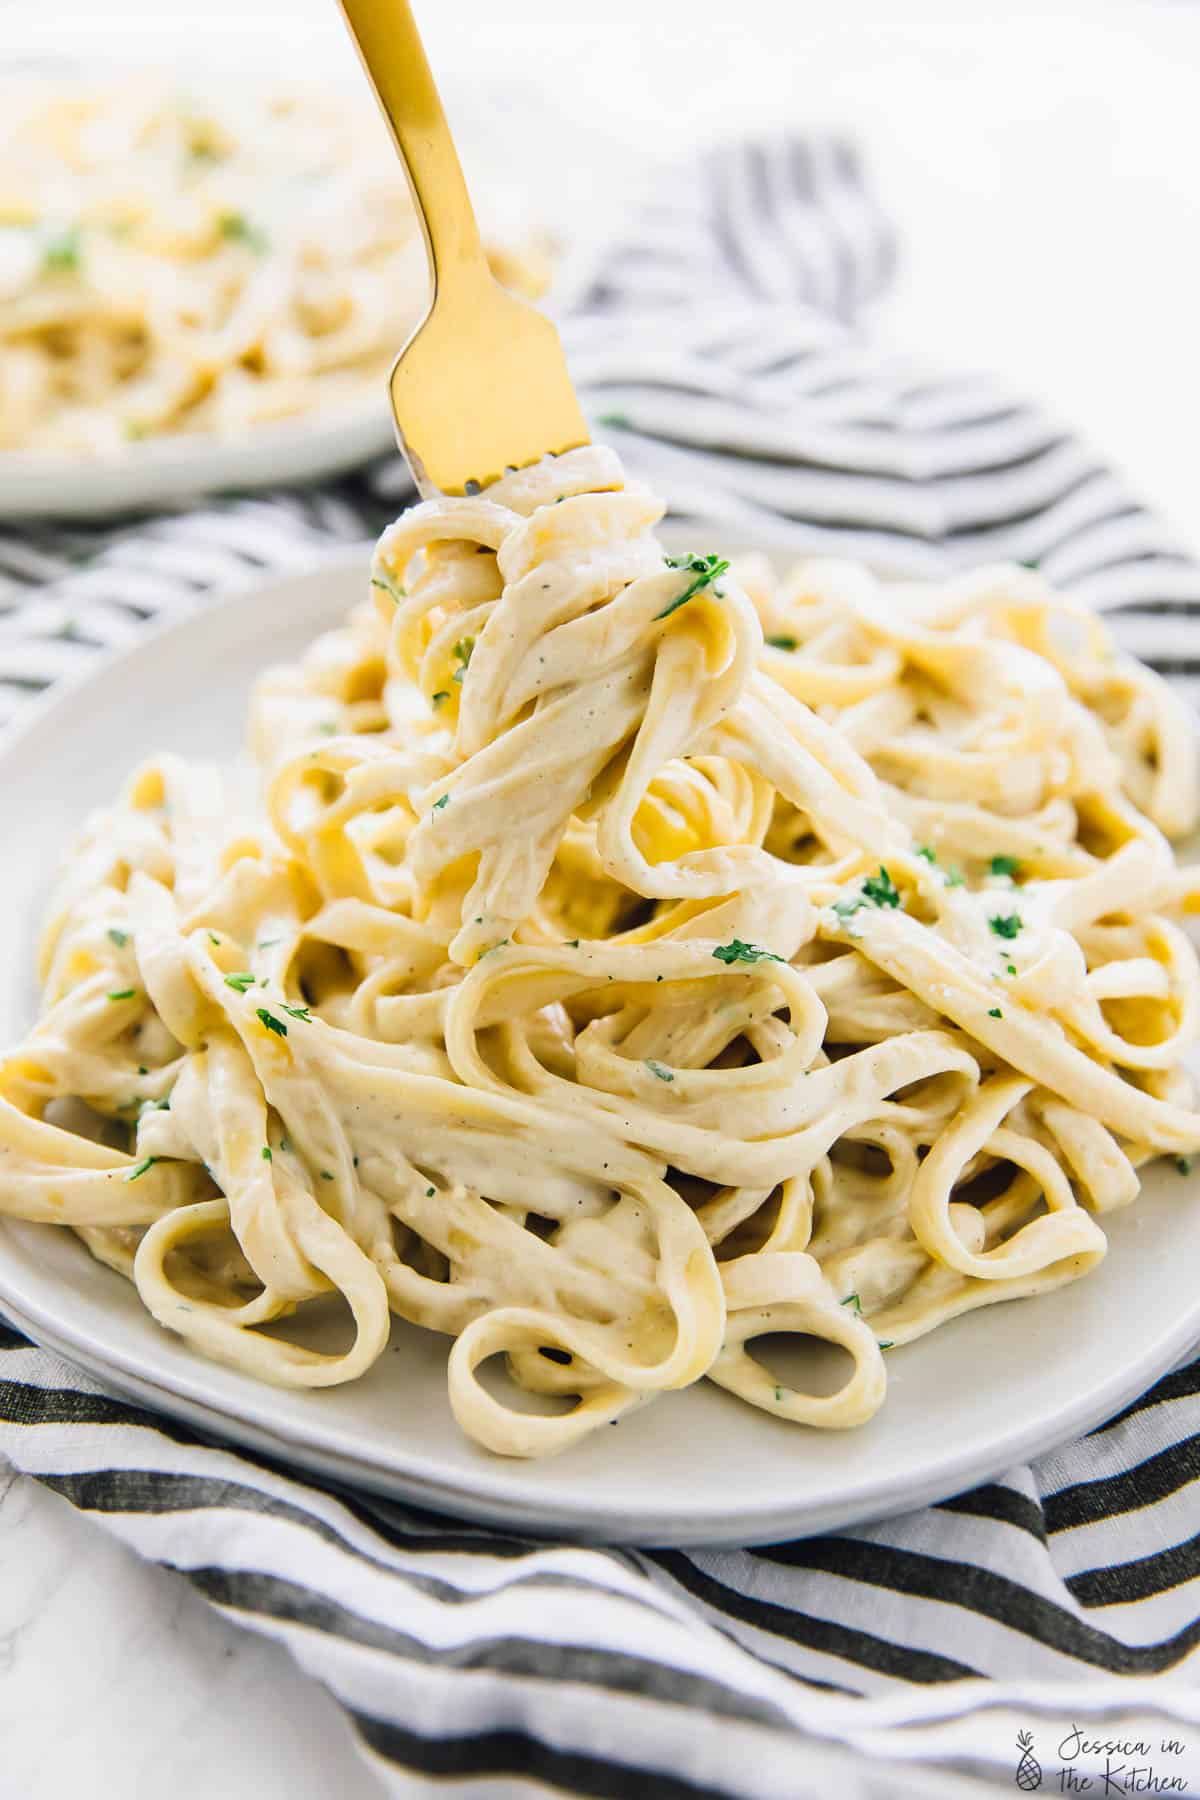 A fork digging into a plate of pasta covered in vegan garlic alfredo sauce.